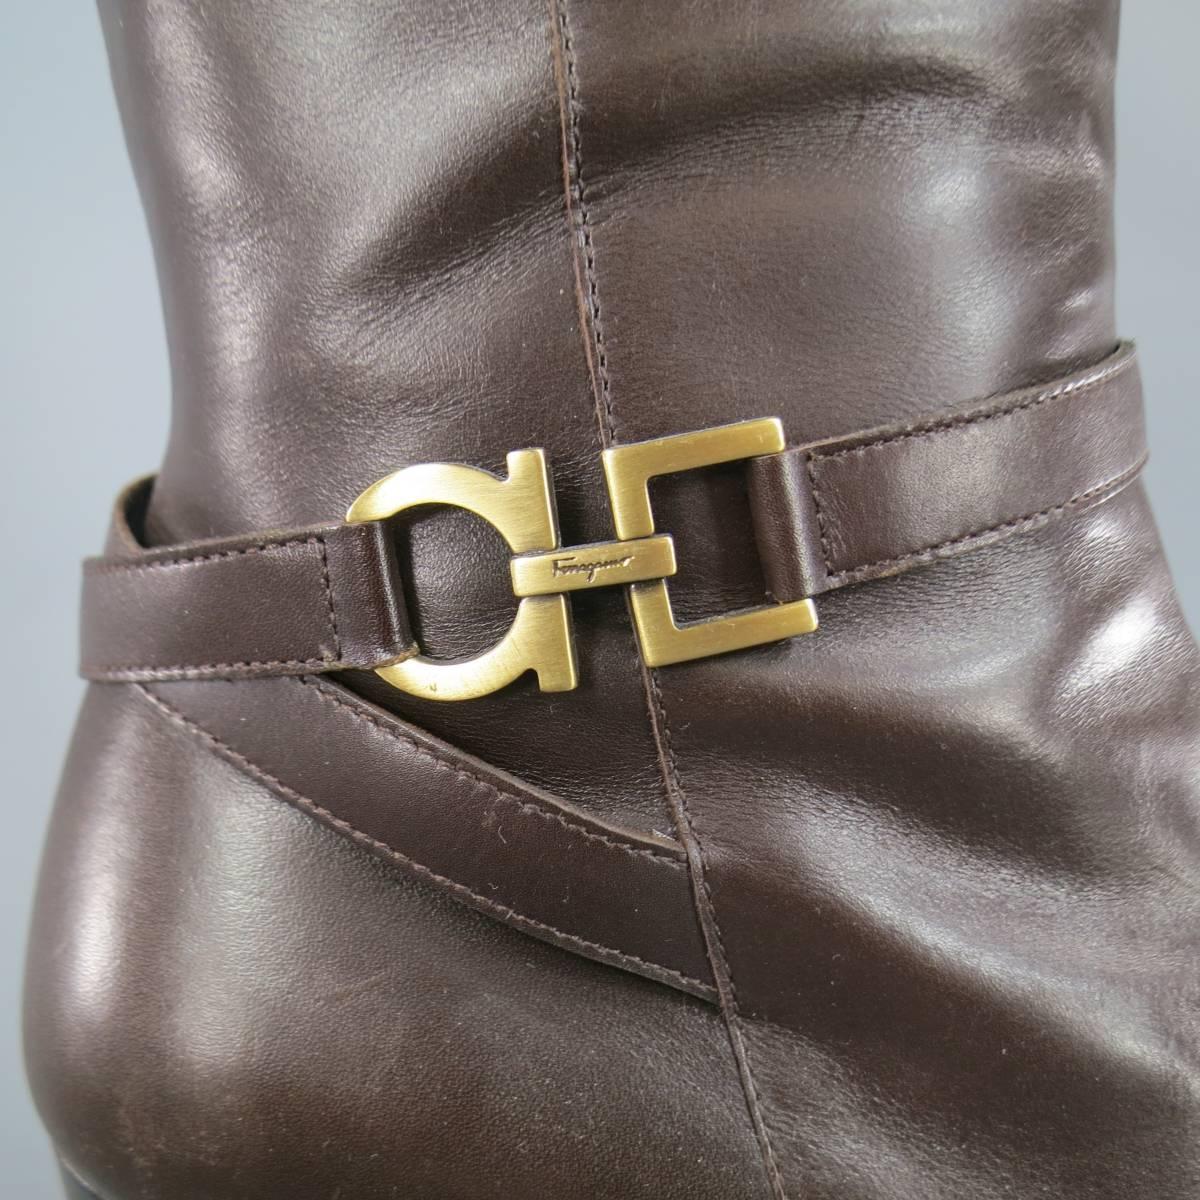 Classic SALVATORE FERRAGAMMO calf boots in brown leather calf high boots featuring a cross ankle strap with gold tone Gancio hardware, low stacked heel, and internal zip. Made in Italy.
 
Excellent Pre-Owned Condition.
Marked: 7 1/2 B
 
Heel: